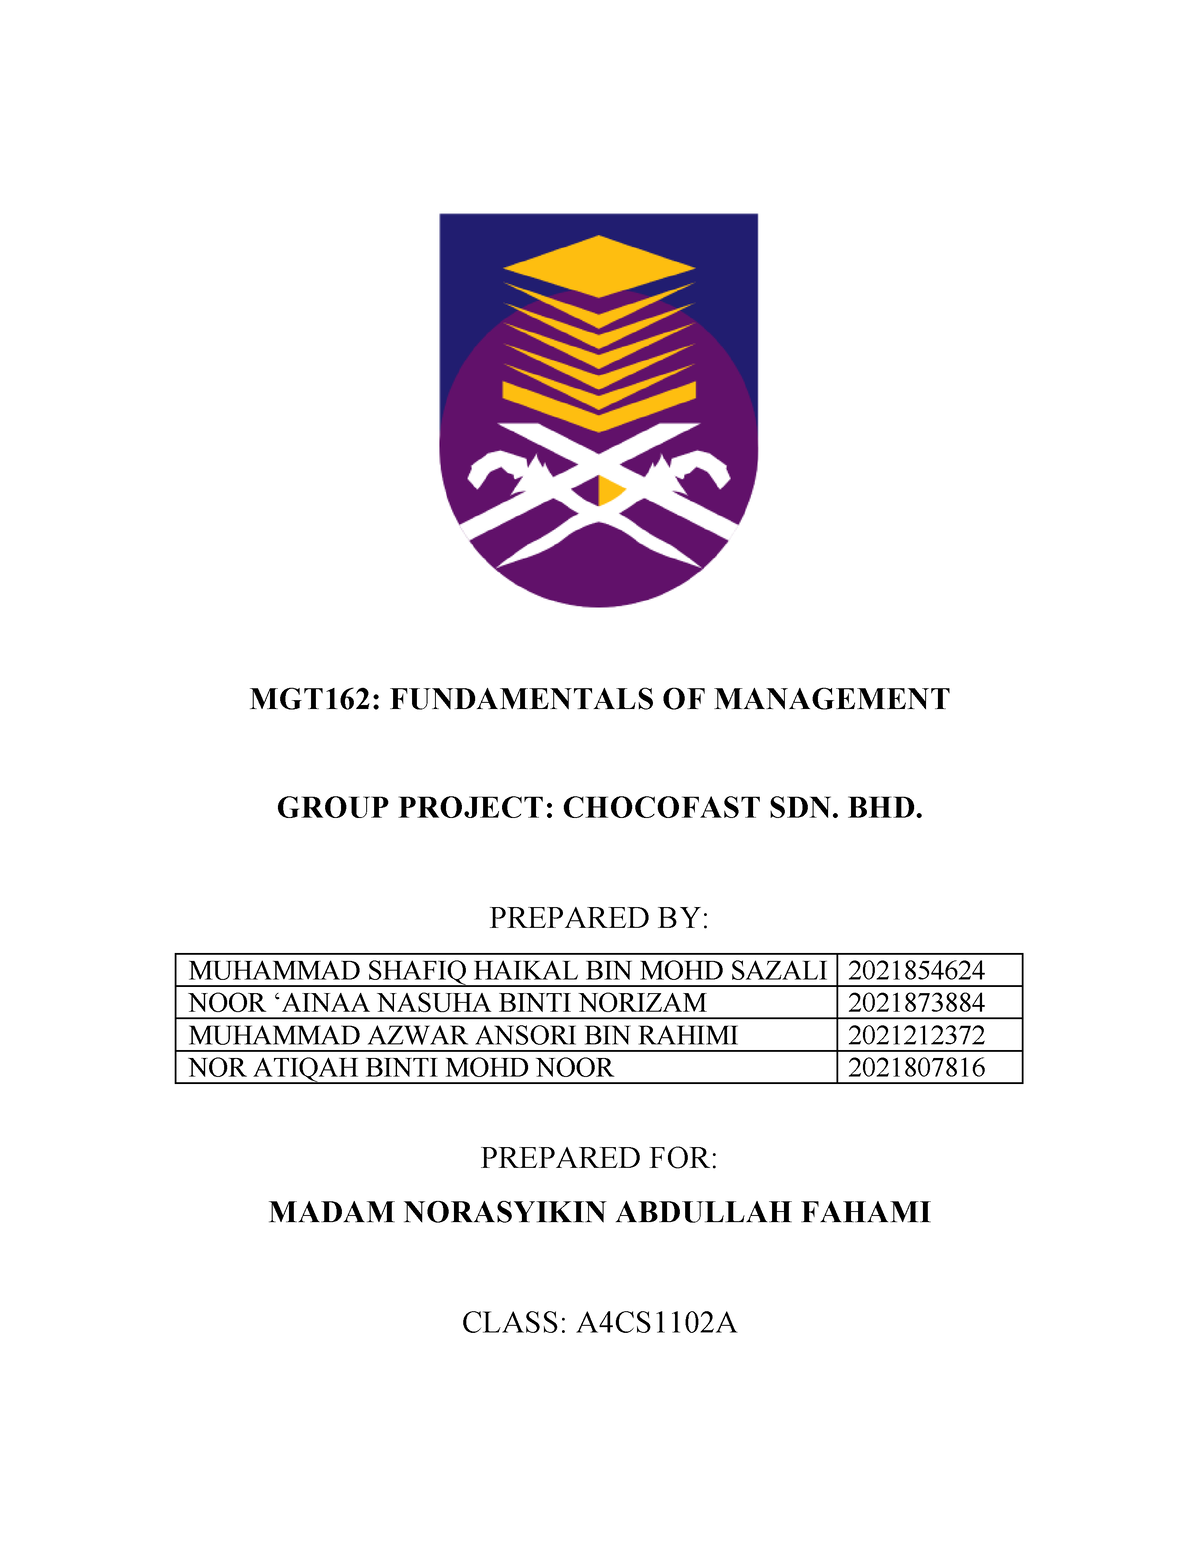 mgt162 group assignment uitm